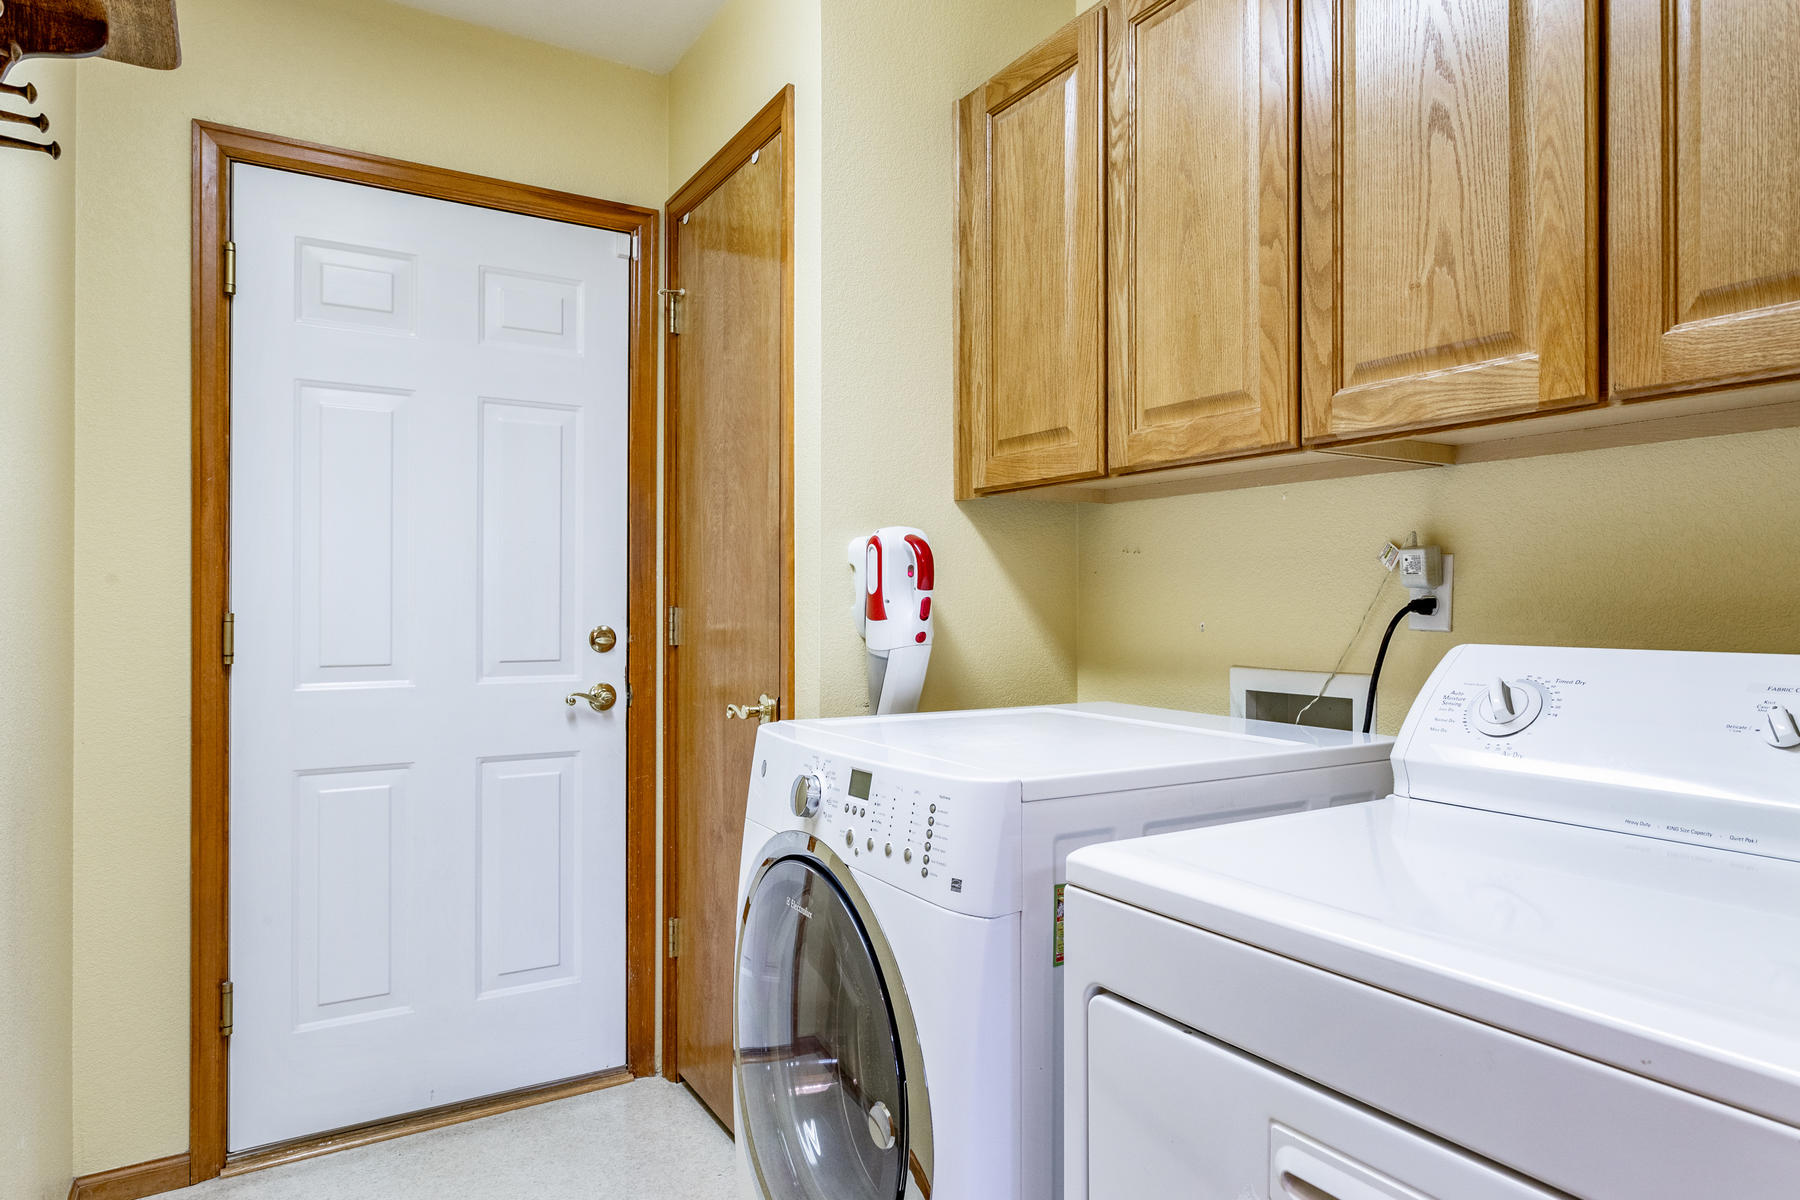 Main Floor Laundry - Washer & Dryer are Included